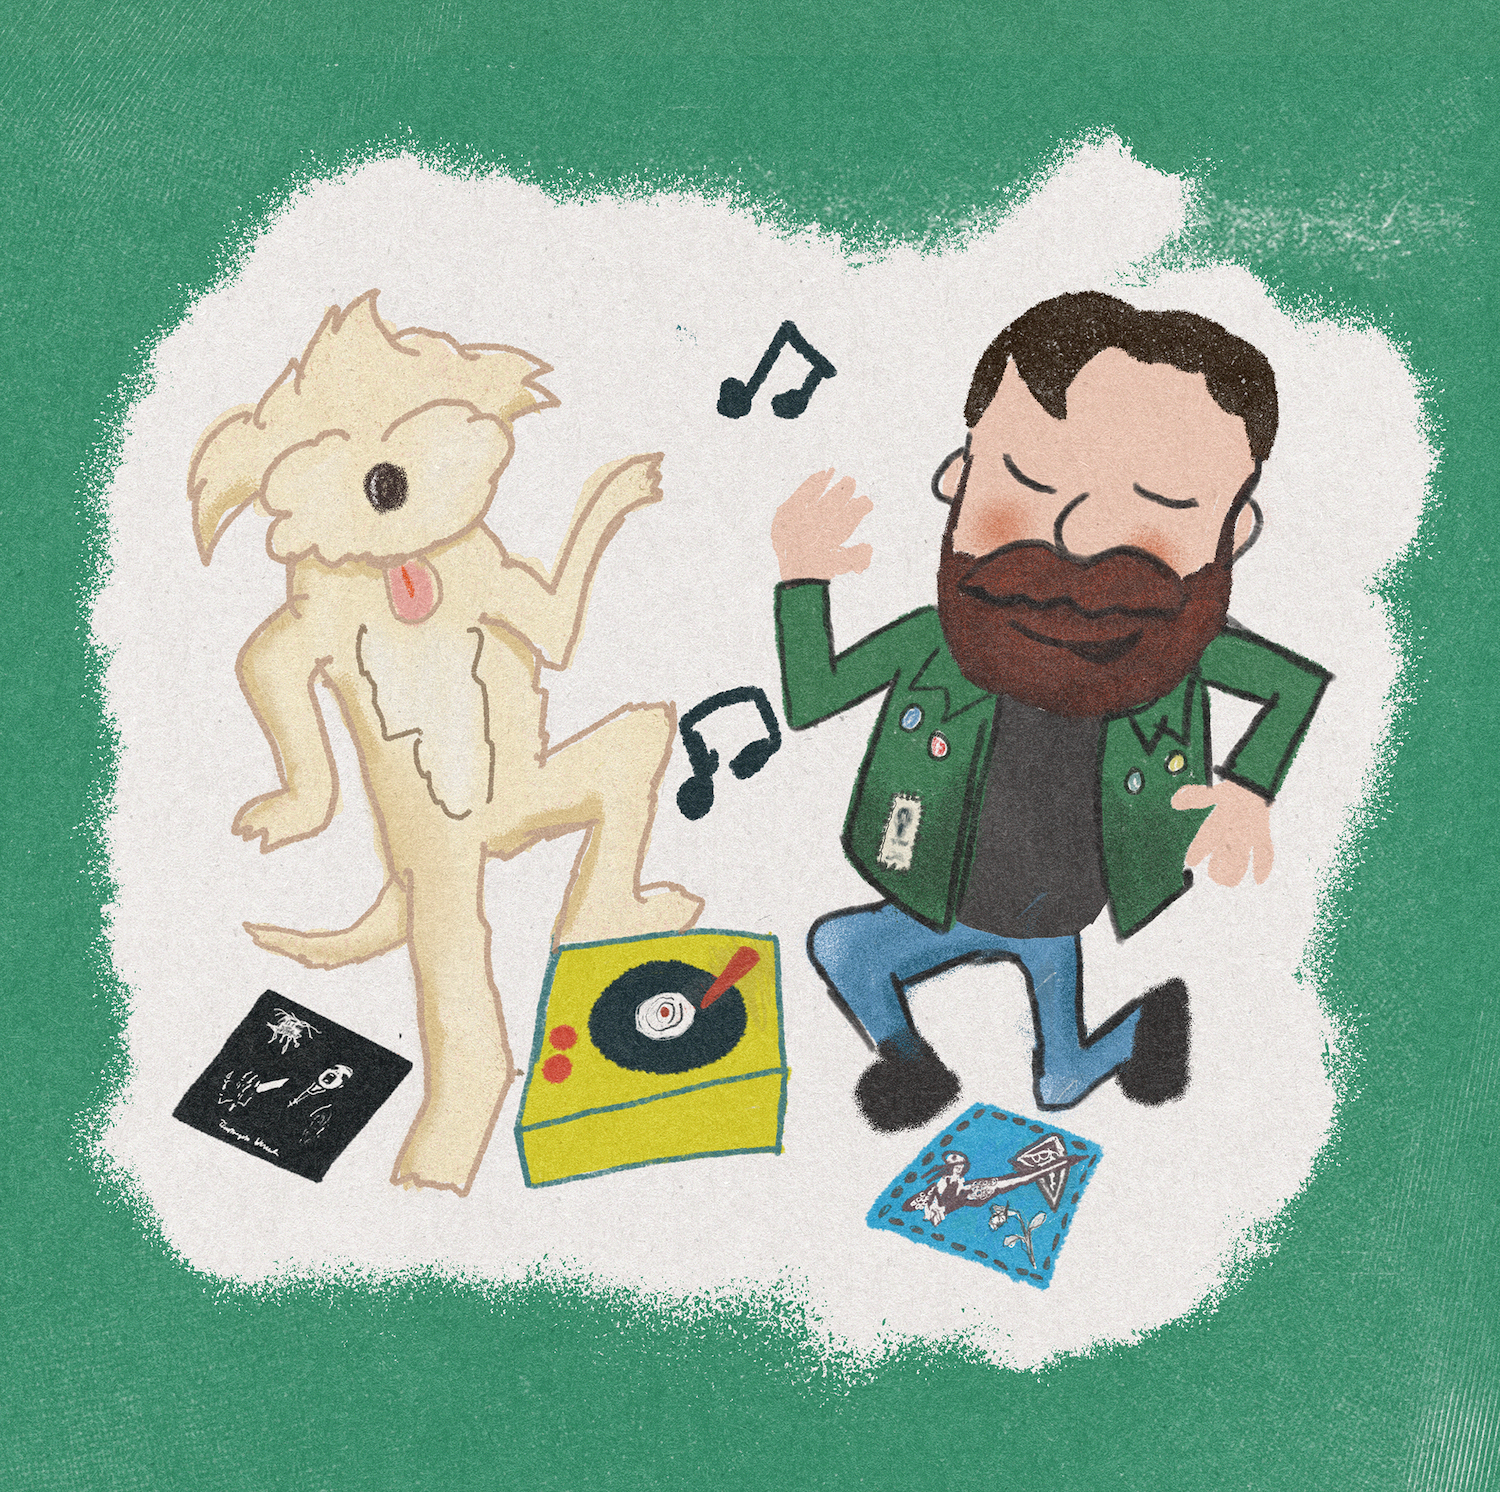 This isn't in the book, but a cartoon drawing of me and my pup rocking out! 

Thanks for checking out my work. Please visit the site to read the first half of the book, check out the accompanying playlist (not of the racist stuff, don't worry!), and sign up for updates on the finished book, and anything related to it!!